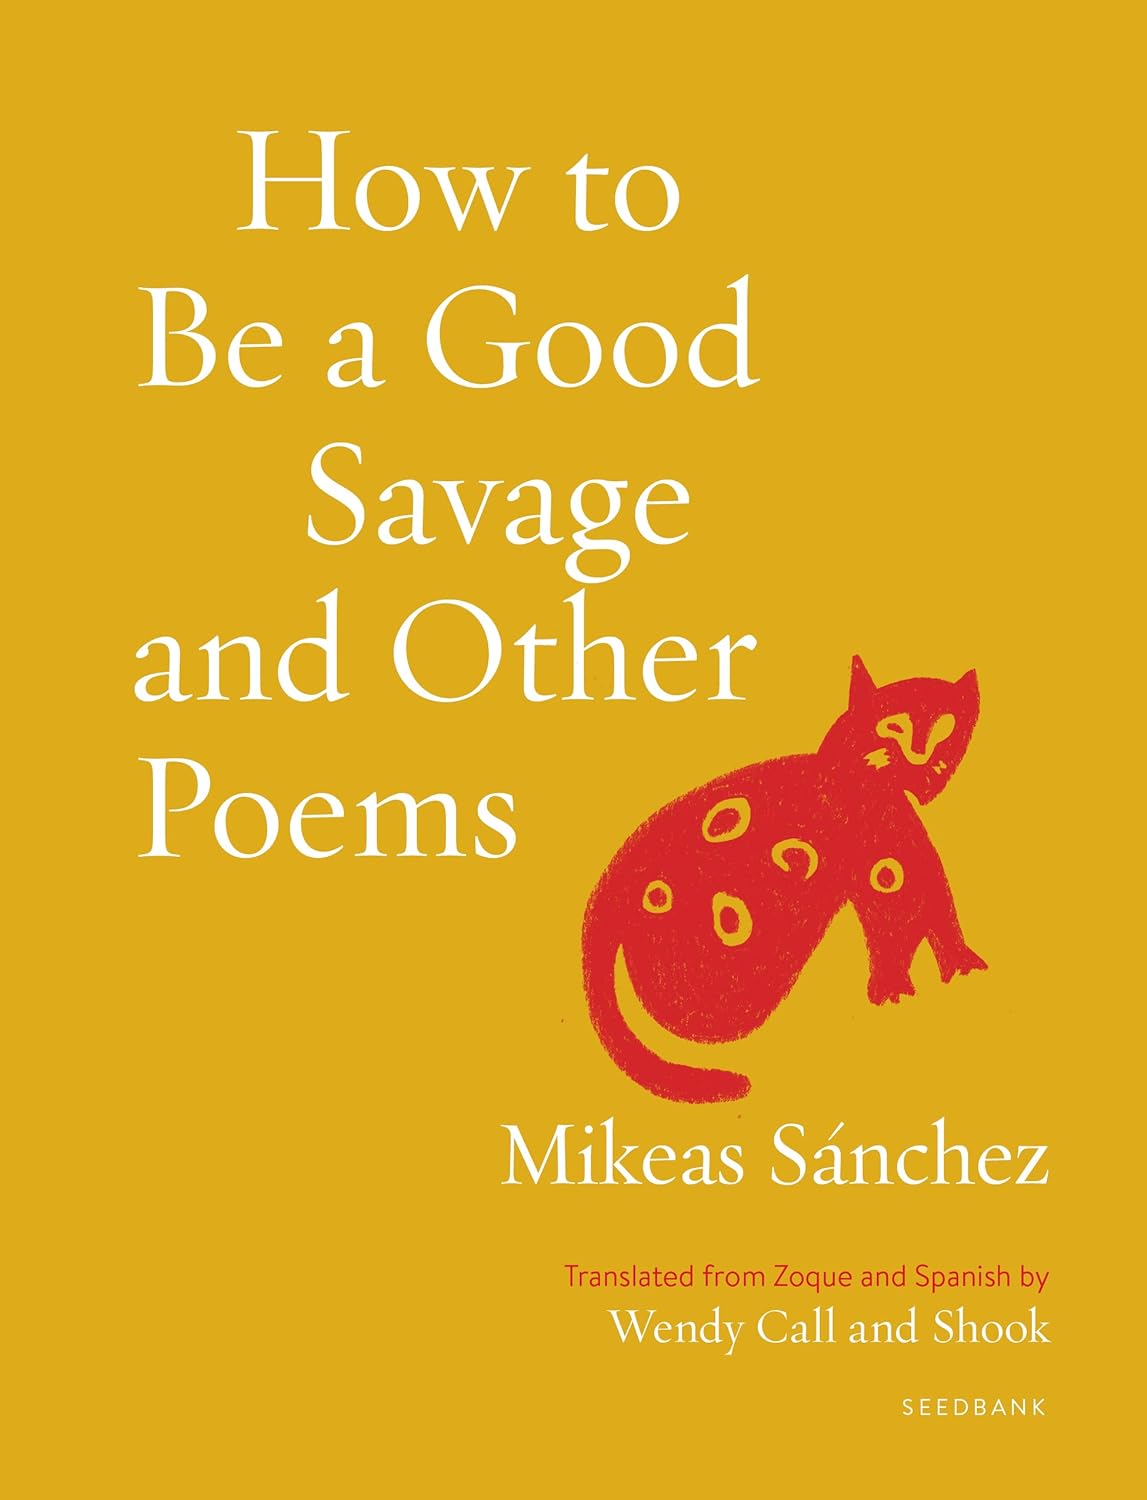 How to Be a Good Savage and Other Poems (Seedbank) Paperback